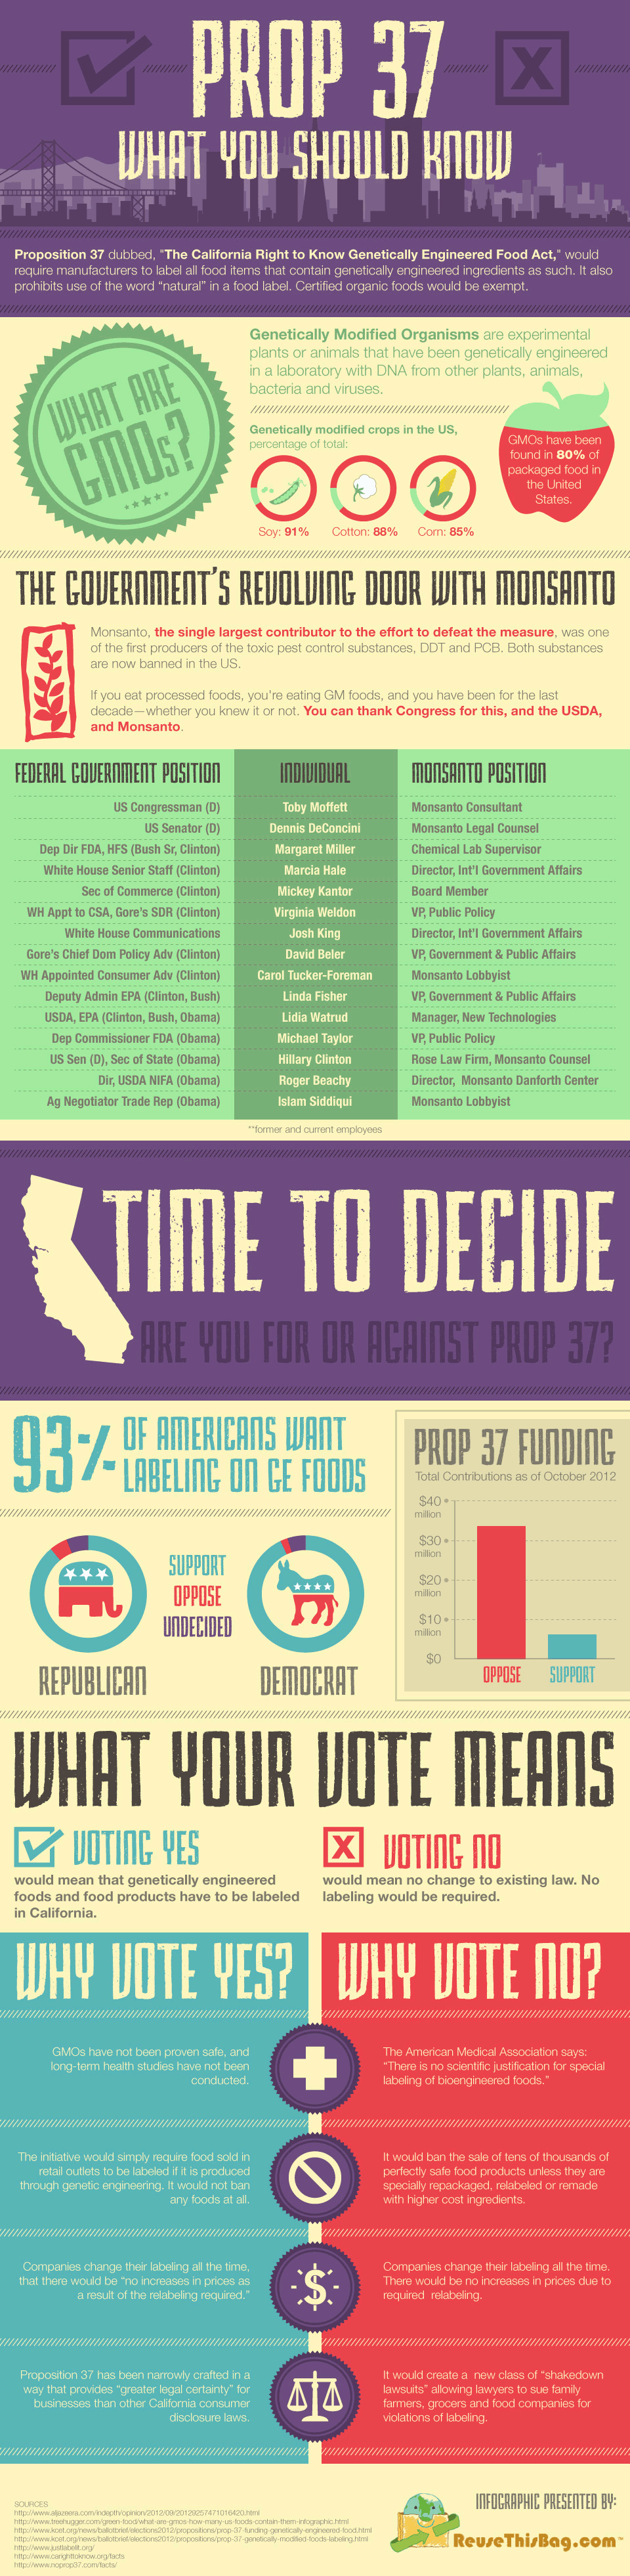 Prop 37 What You Should Know